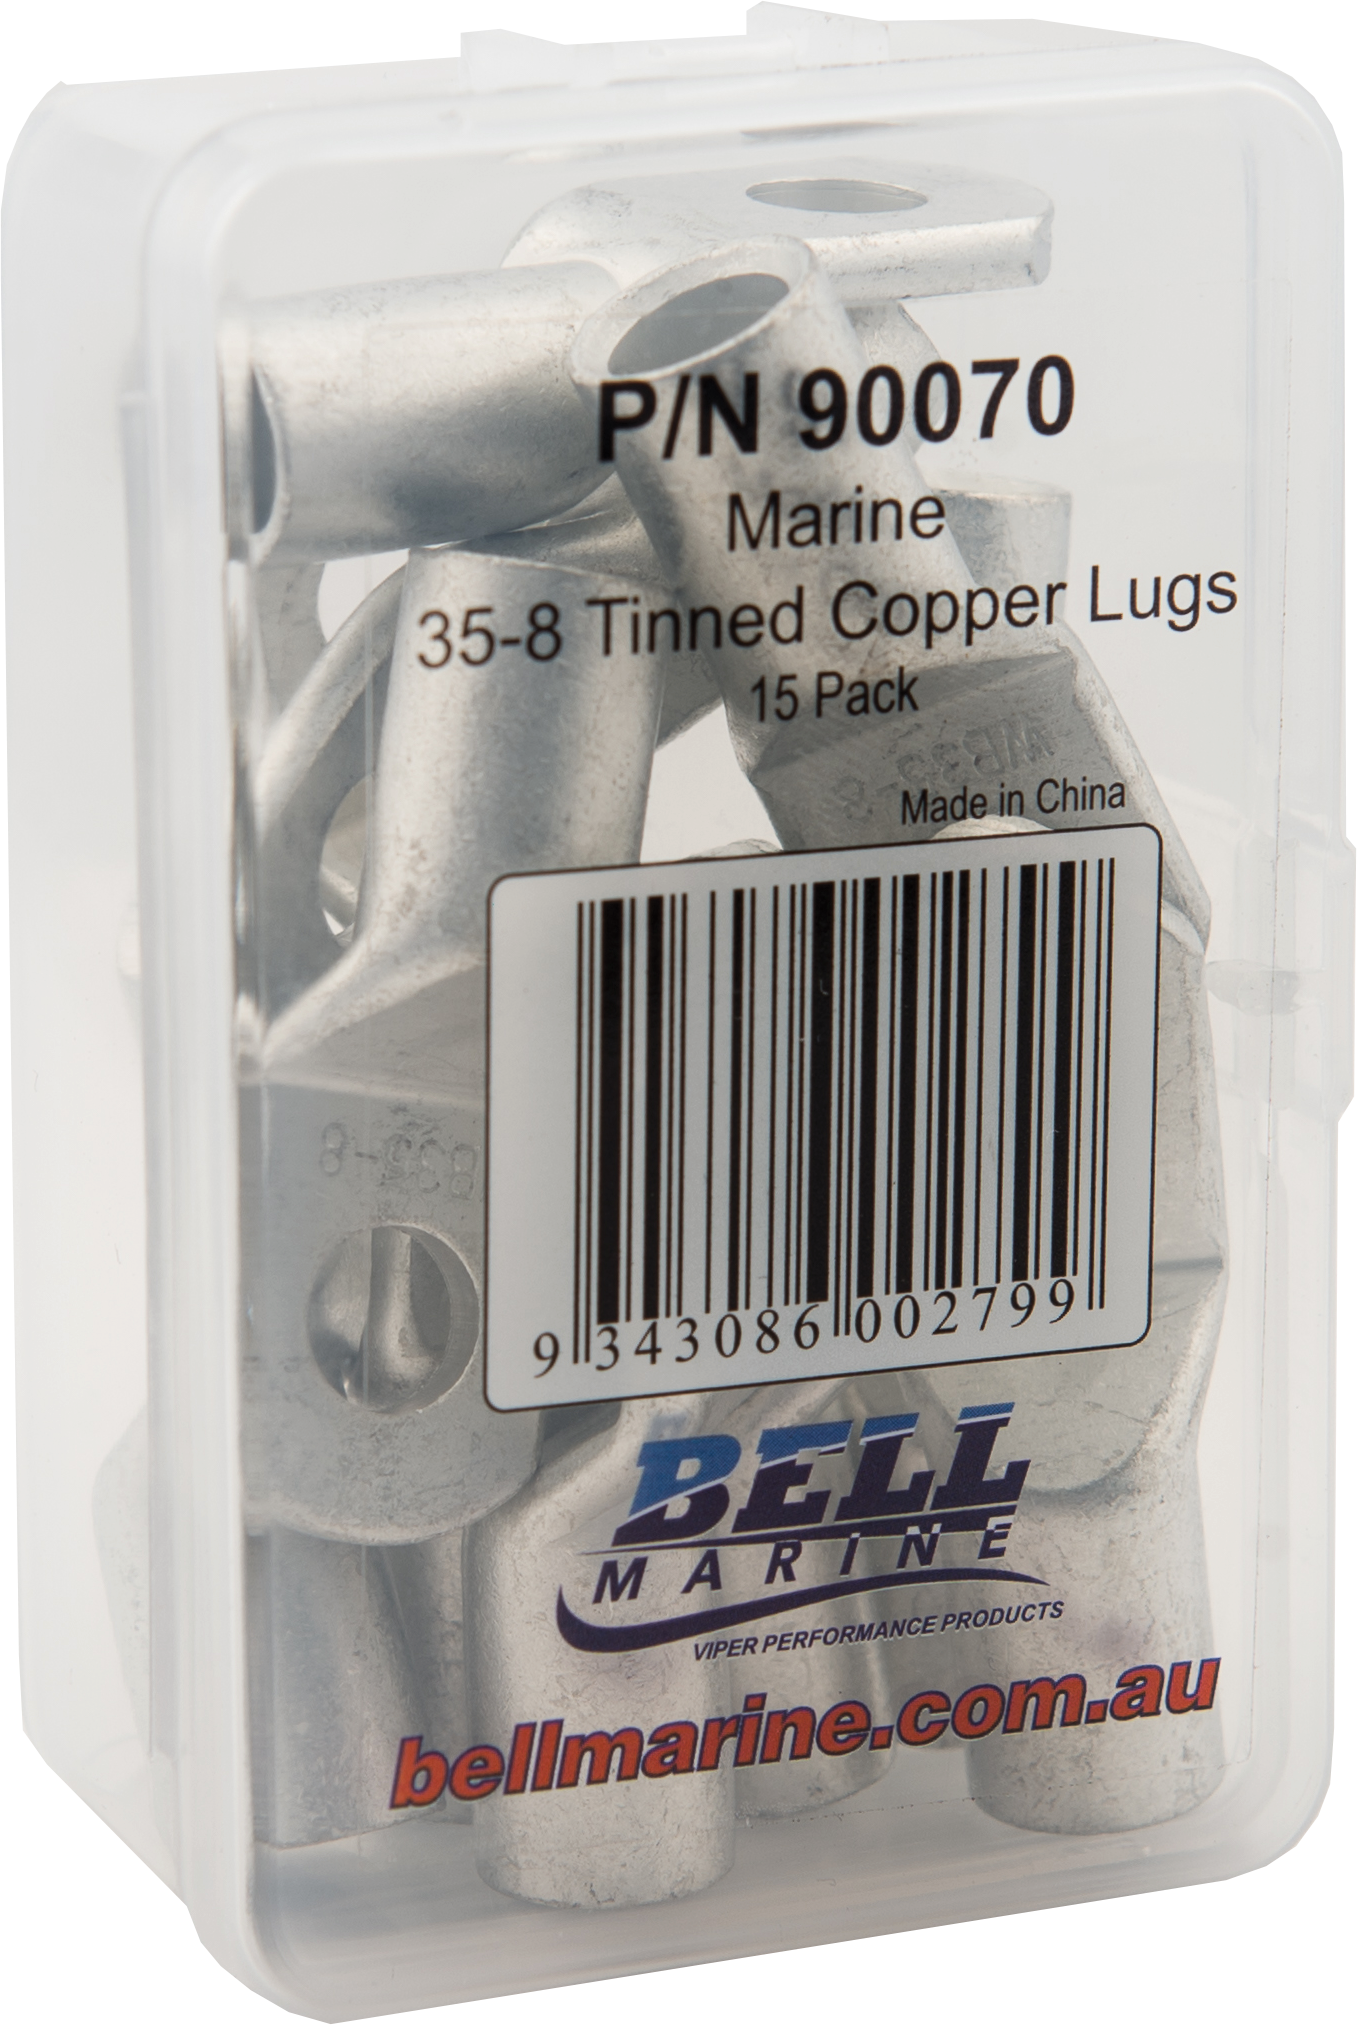 Tinned Copper Lugs 35-8mm – 15 Pack